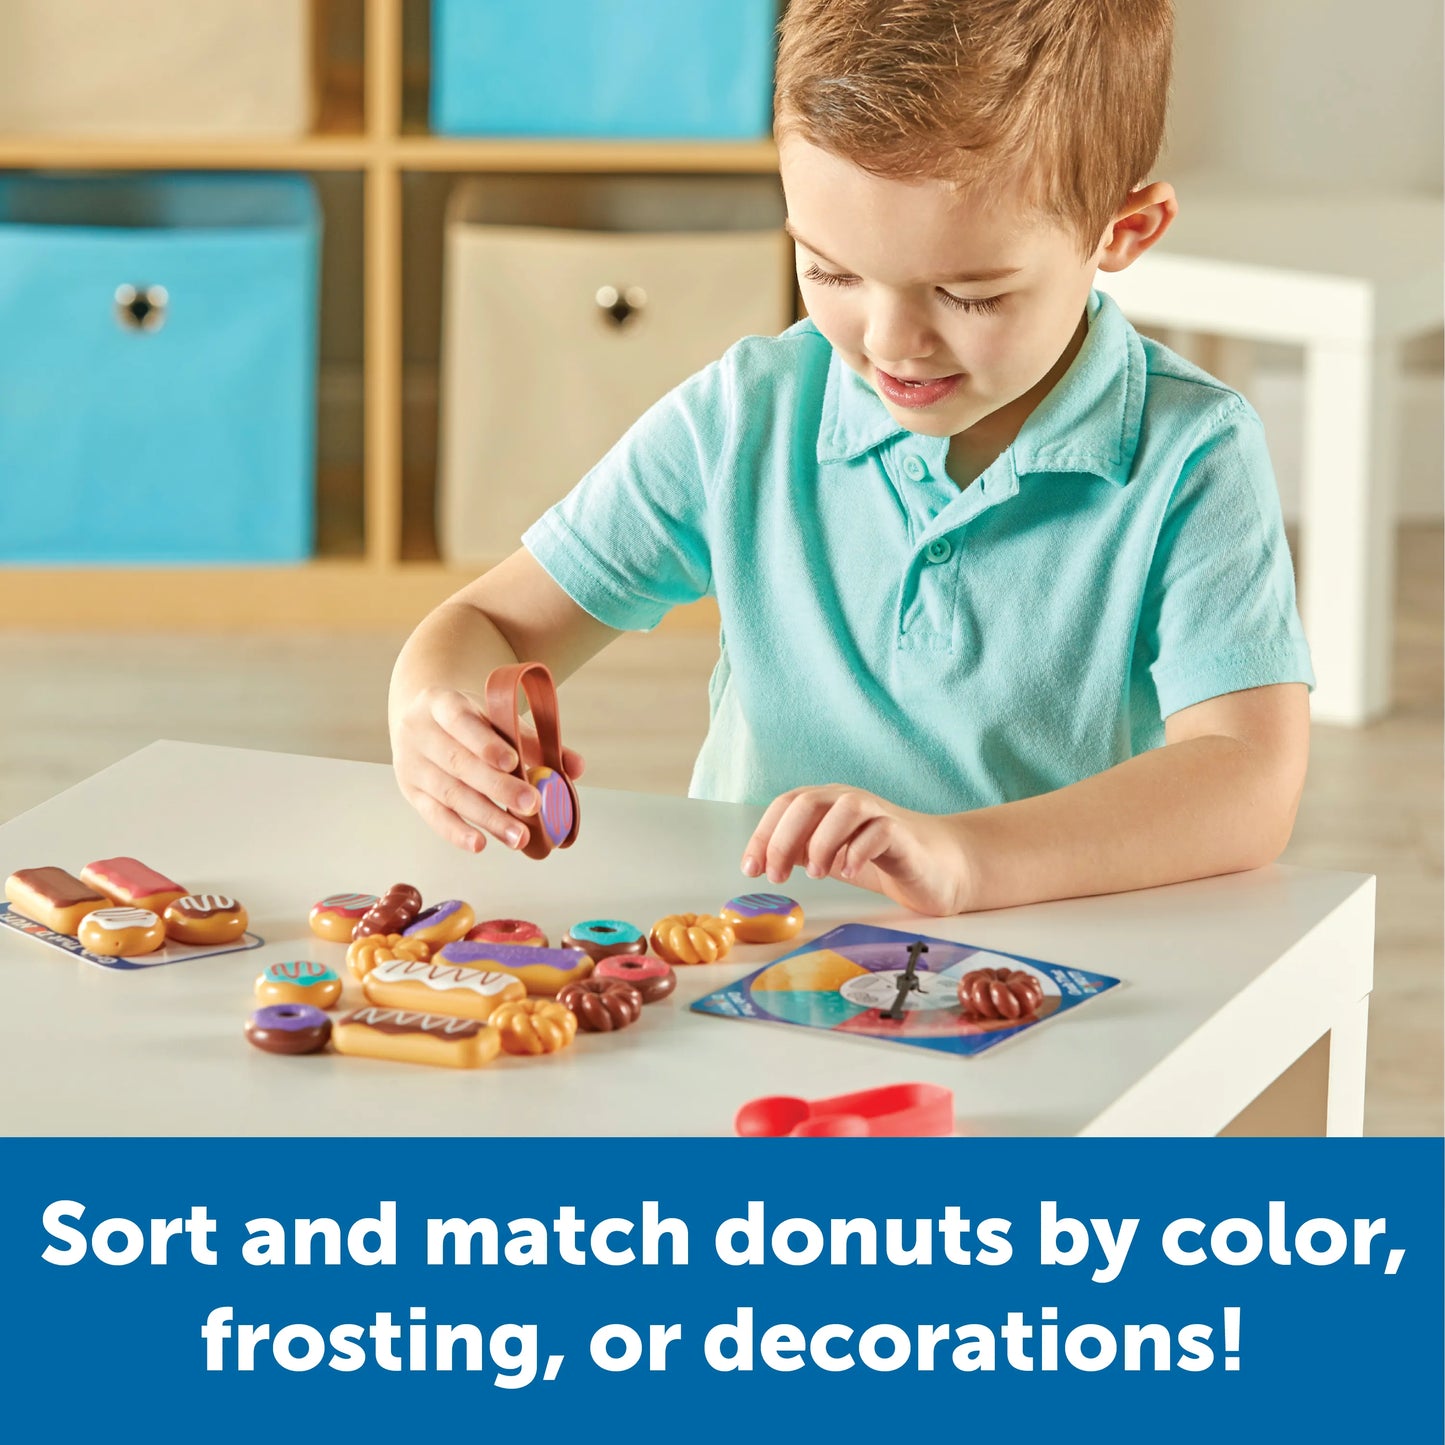 Learning Resources Grab That Donut Fine Motor Game